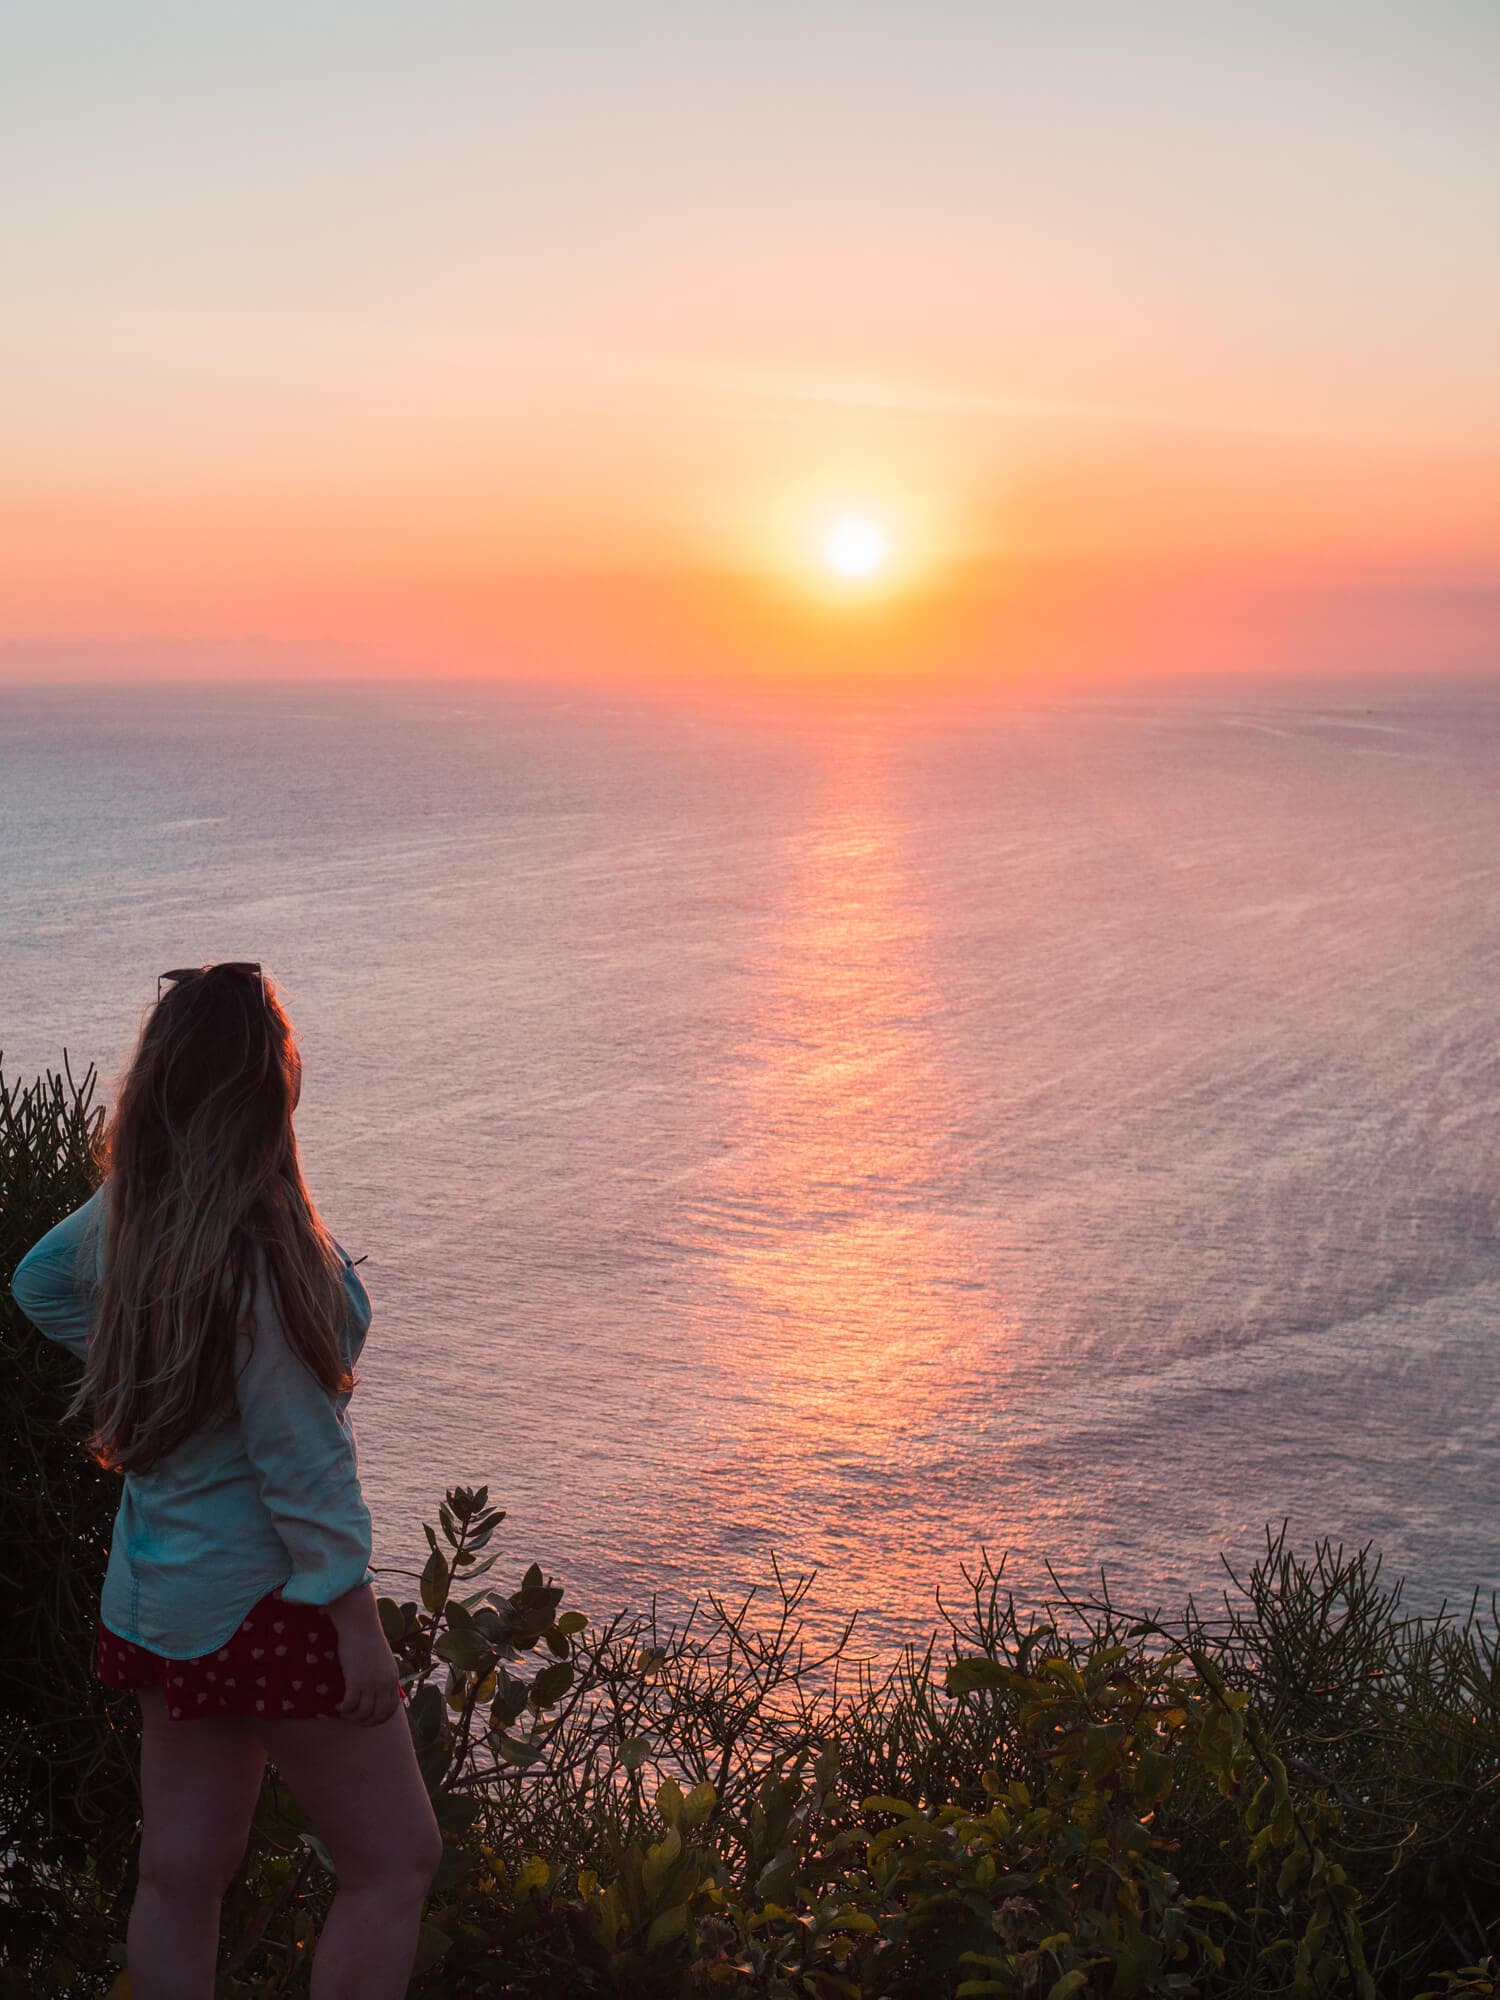 Girl watching the sunset from Karang Boma Cliff in Uluwatu. The sky is pink and orange and the sun bright yellow.